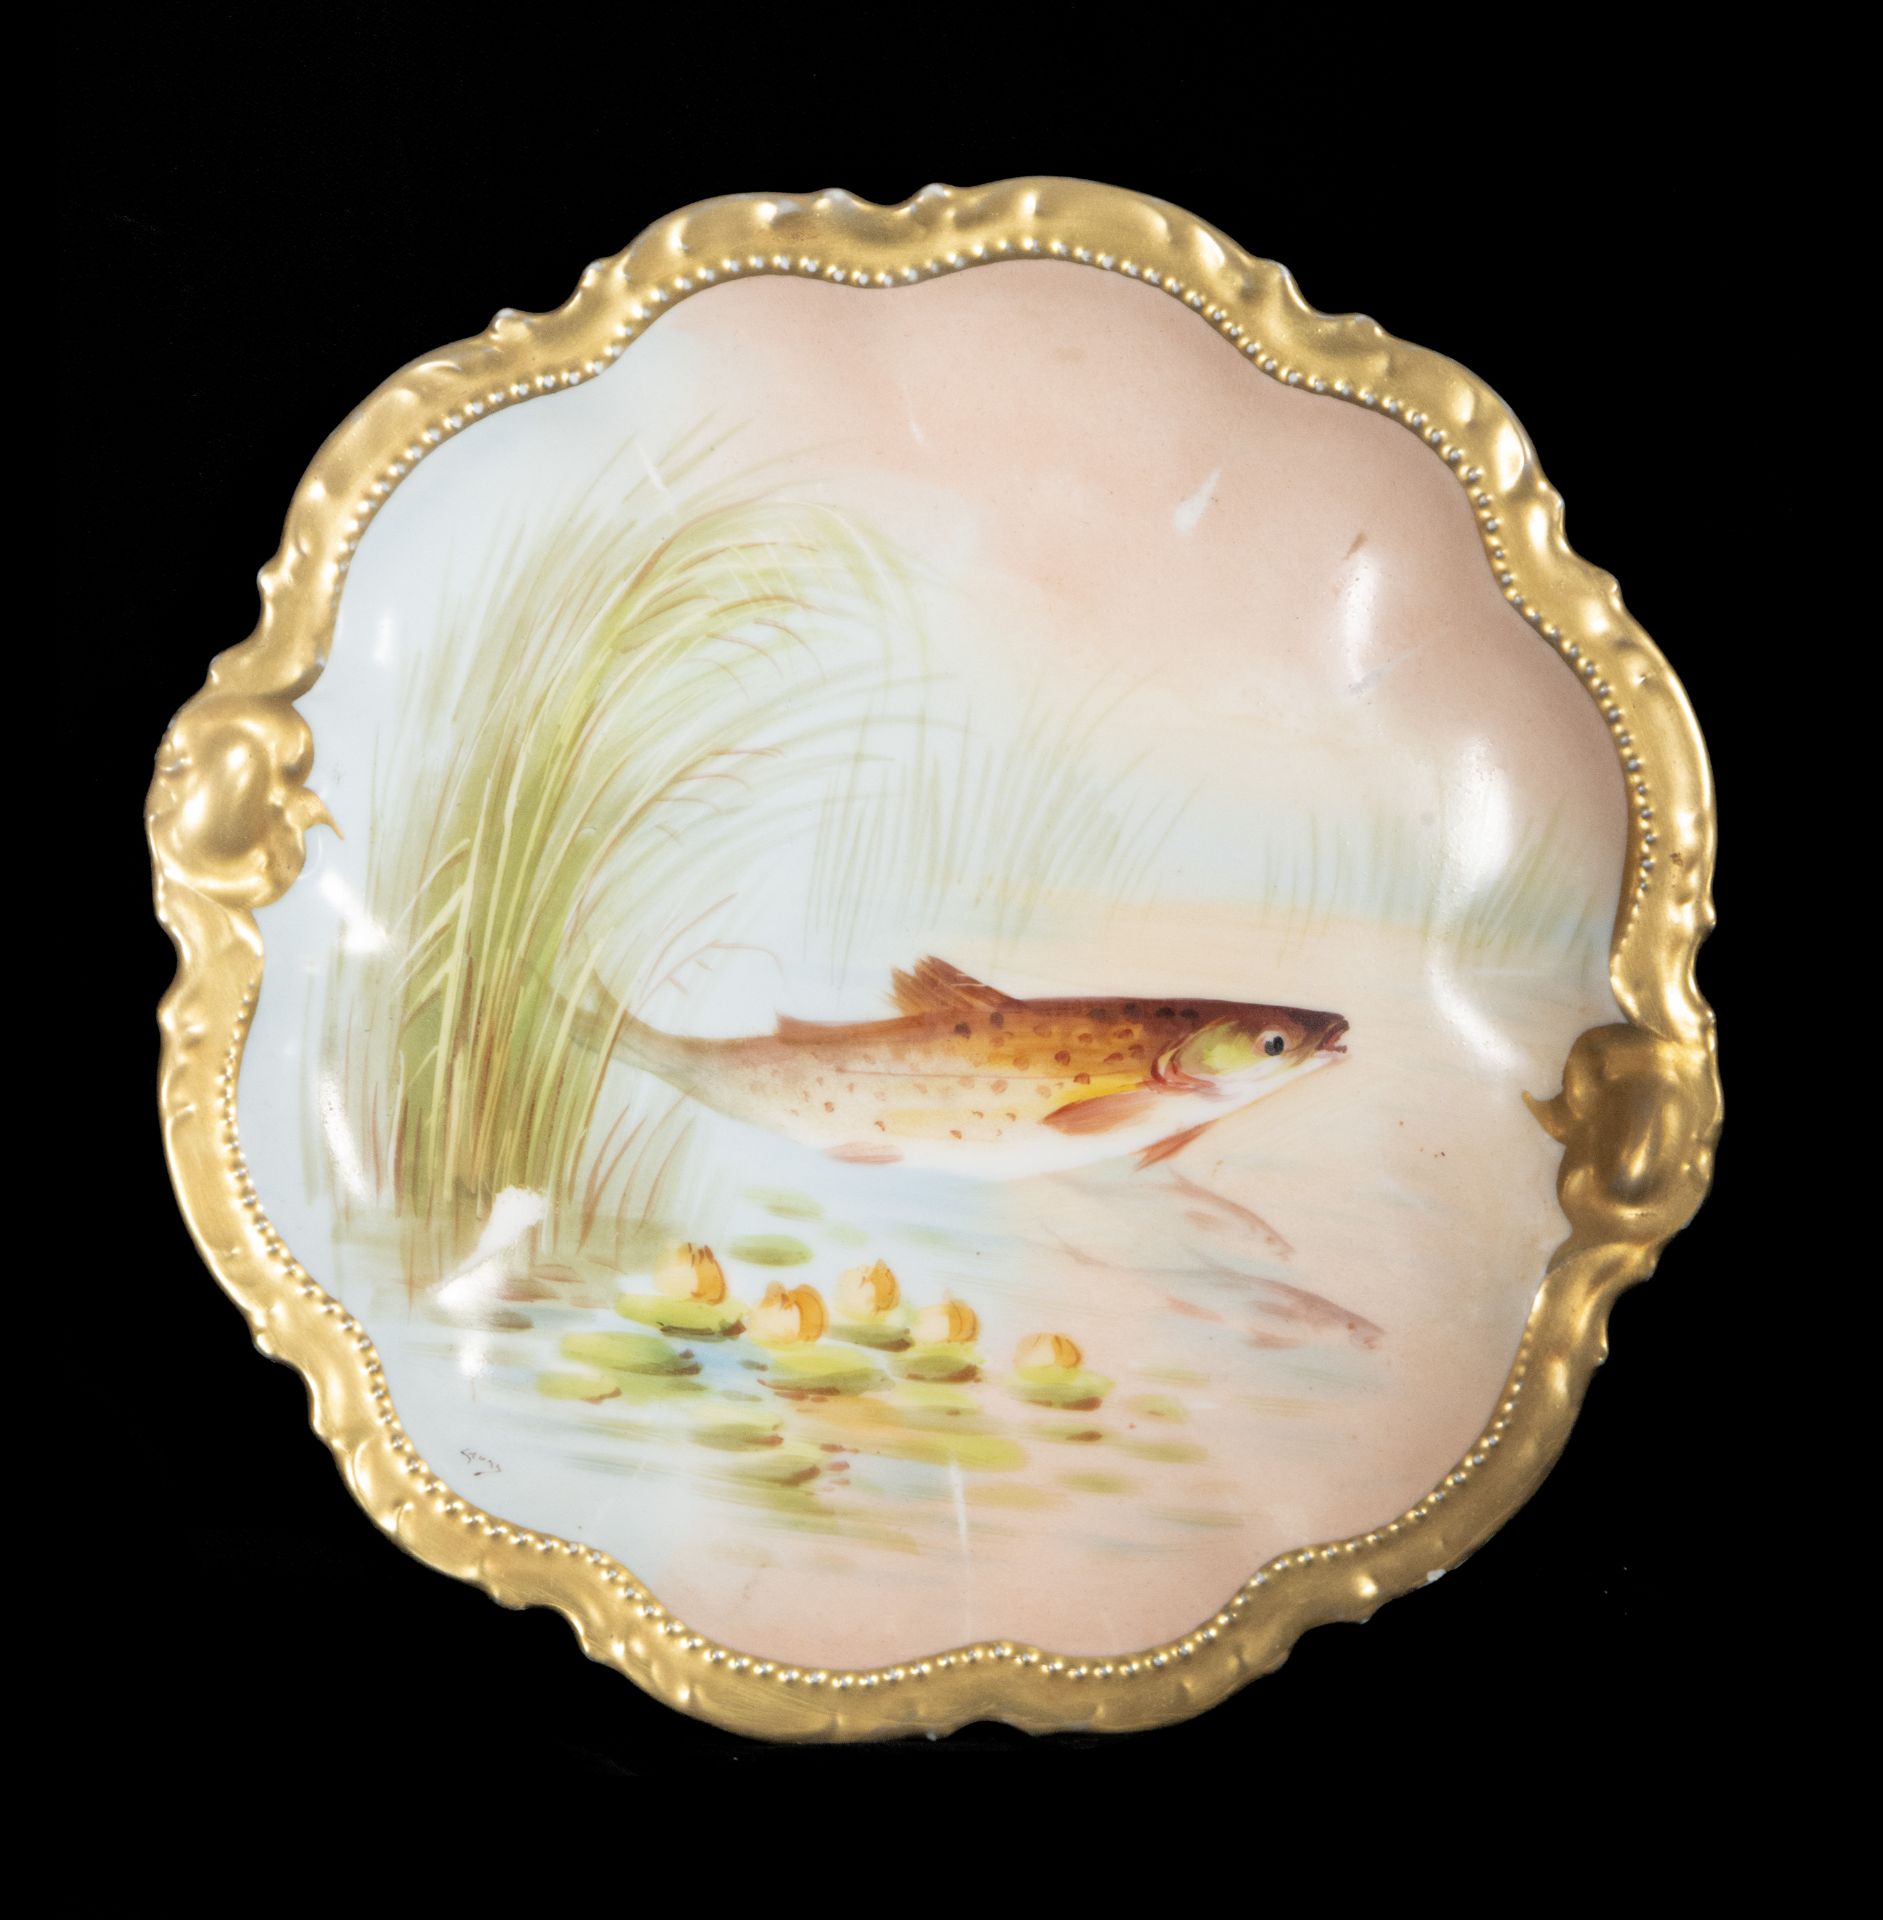 19th Century Limoges Porcelain Fish Dinnerware Set by the Count of Artois, 19th Century - Image 8 of 12